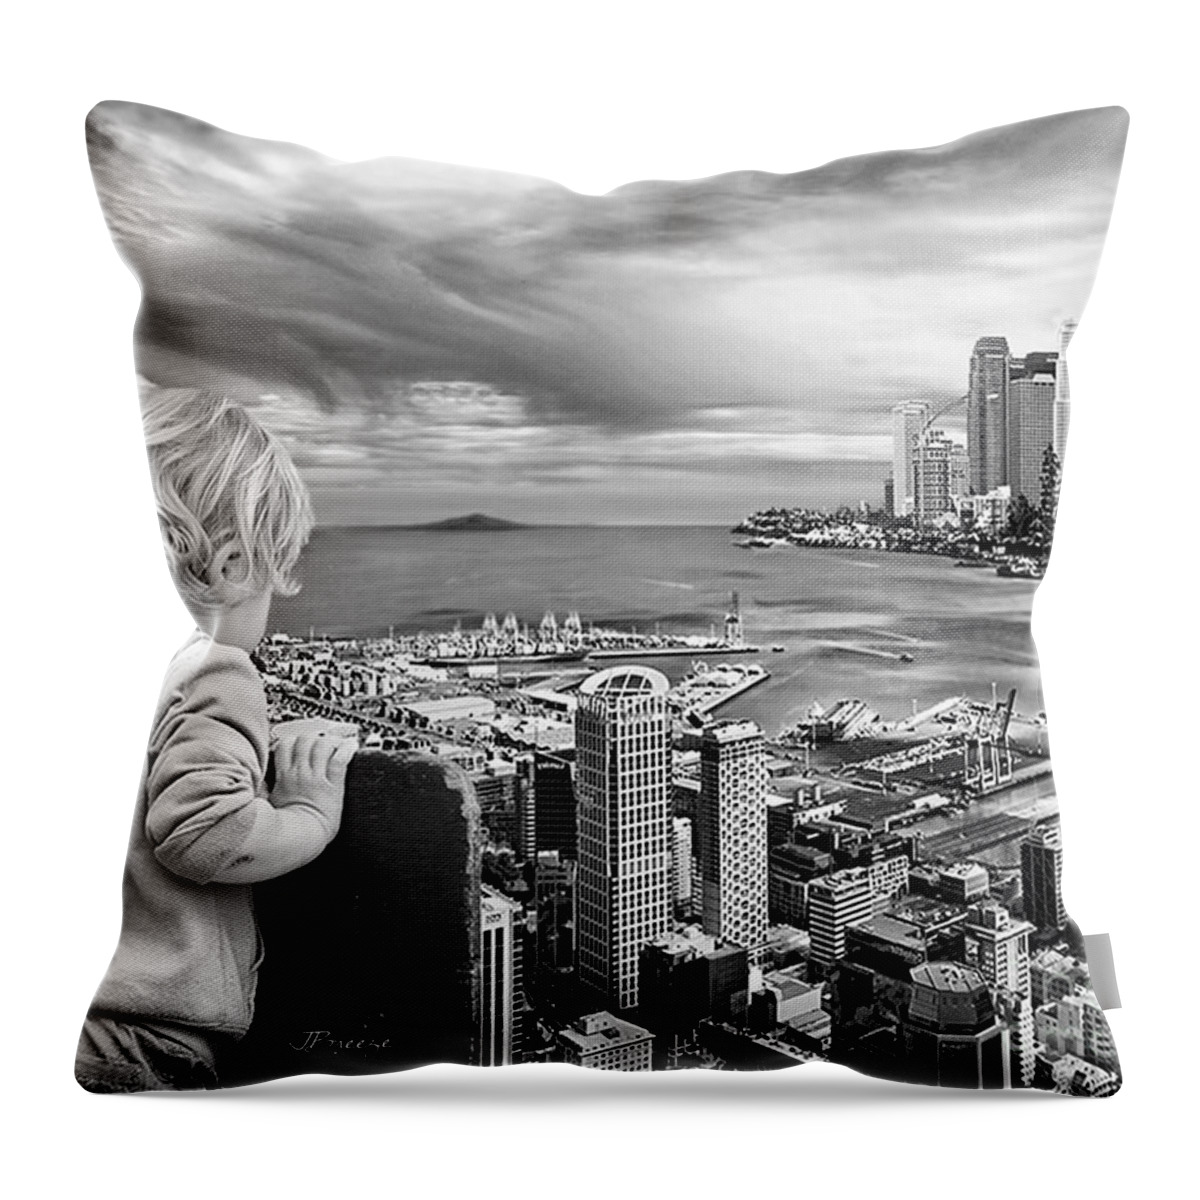 Digital Art Throw Pillow featuring the photograph No Vacancy  by Jennie Breeze